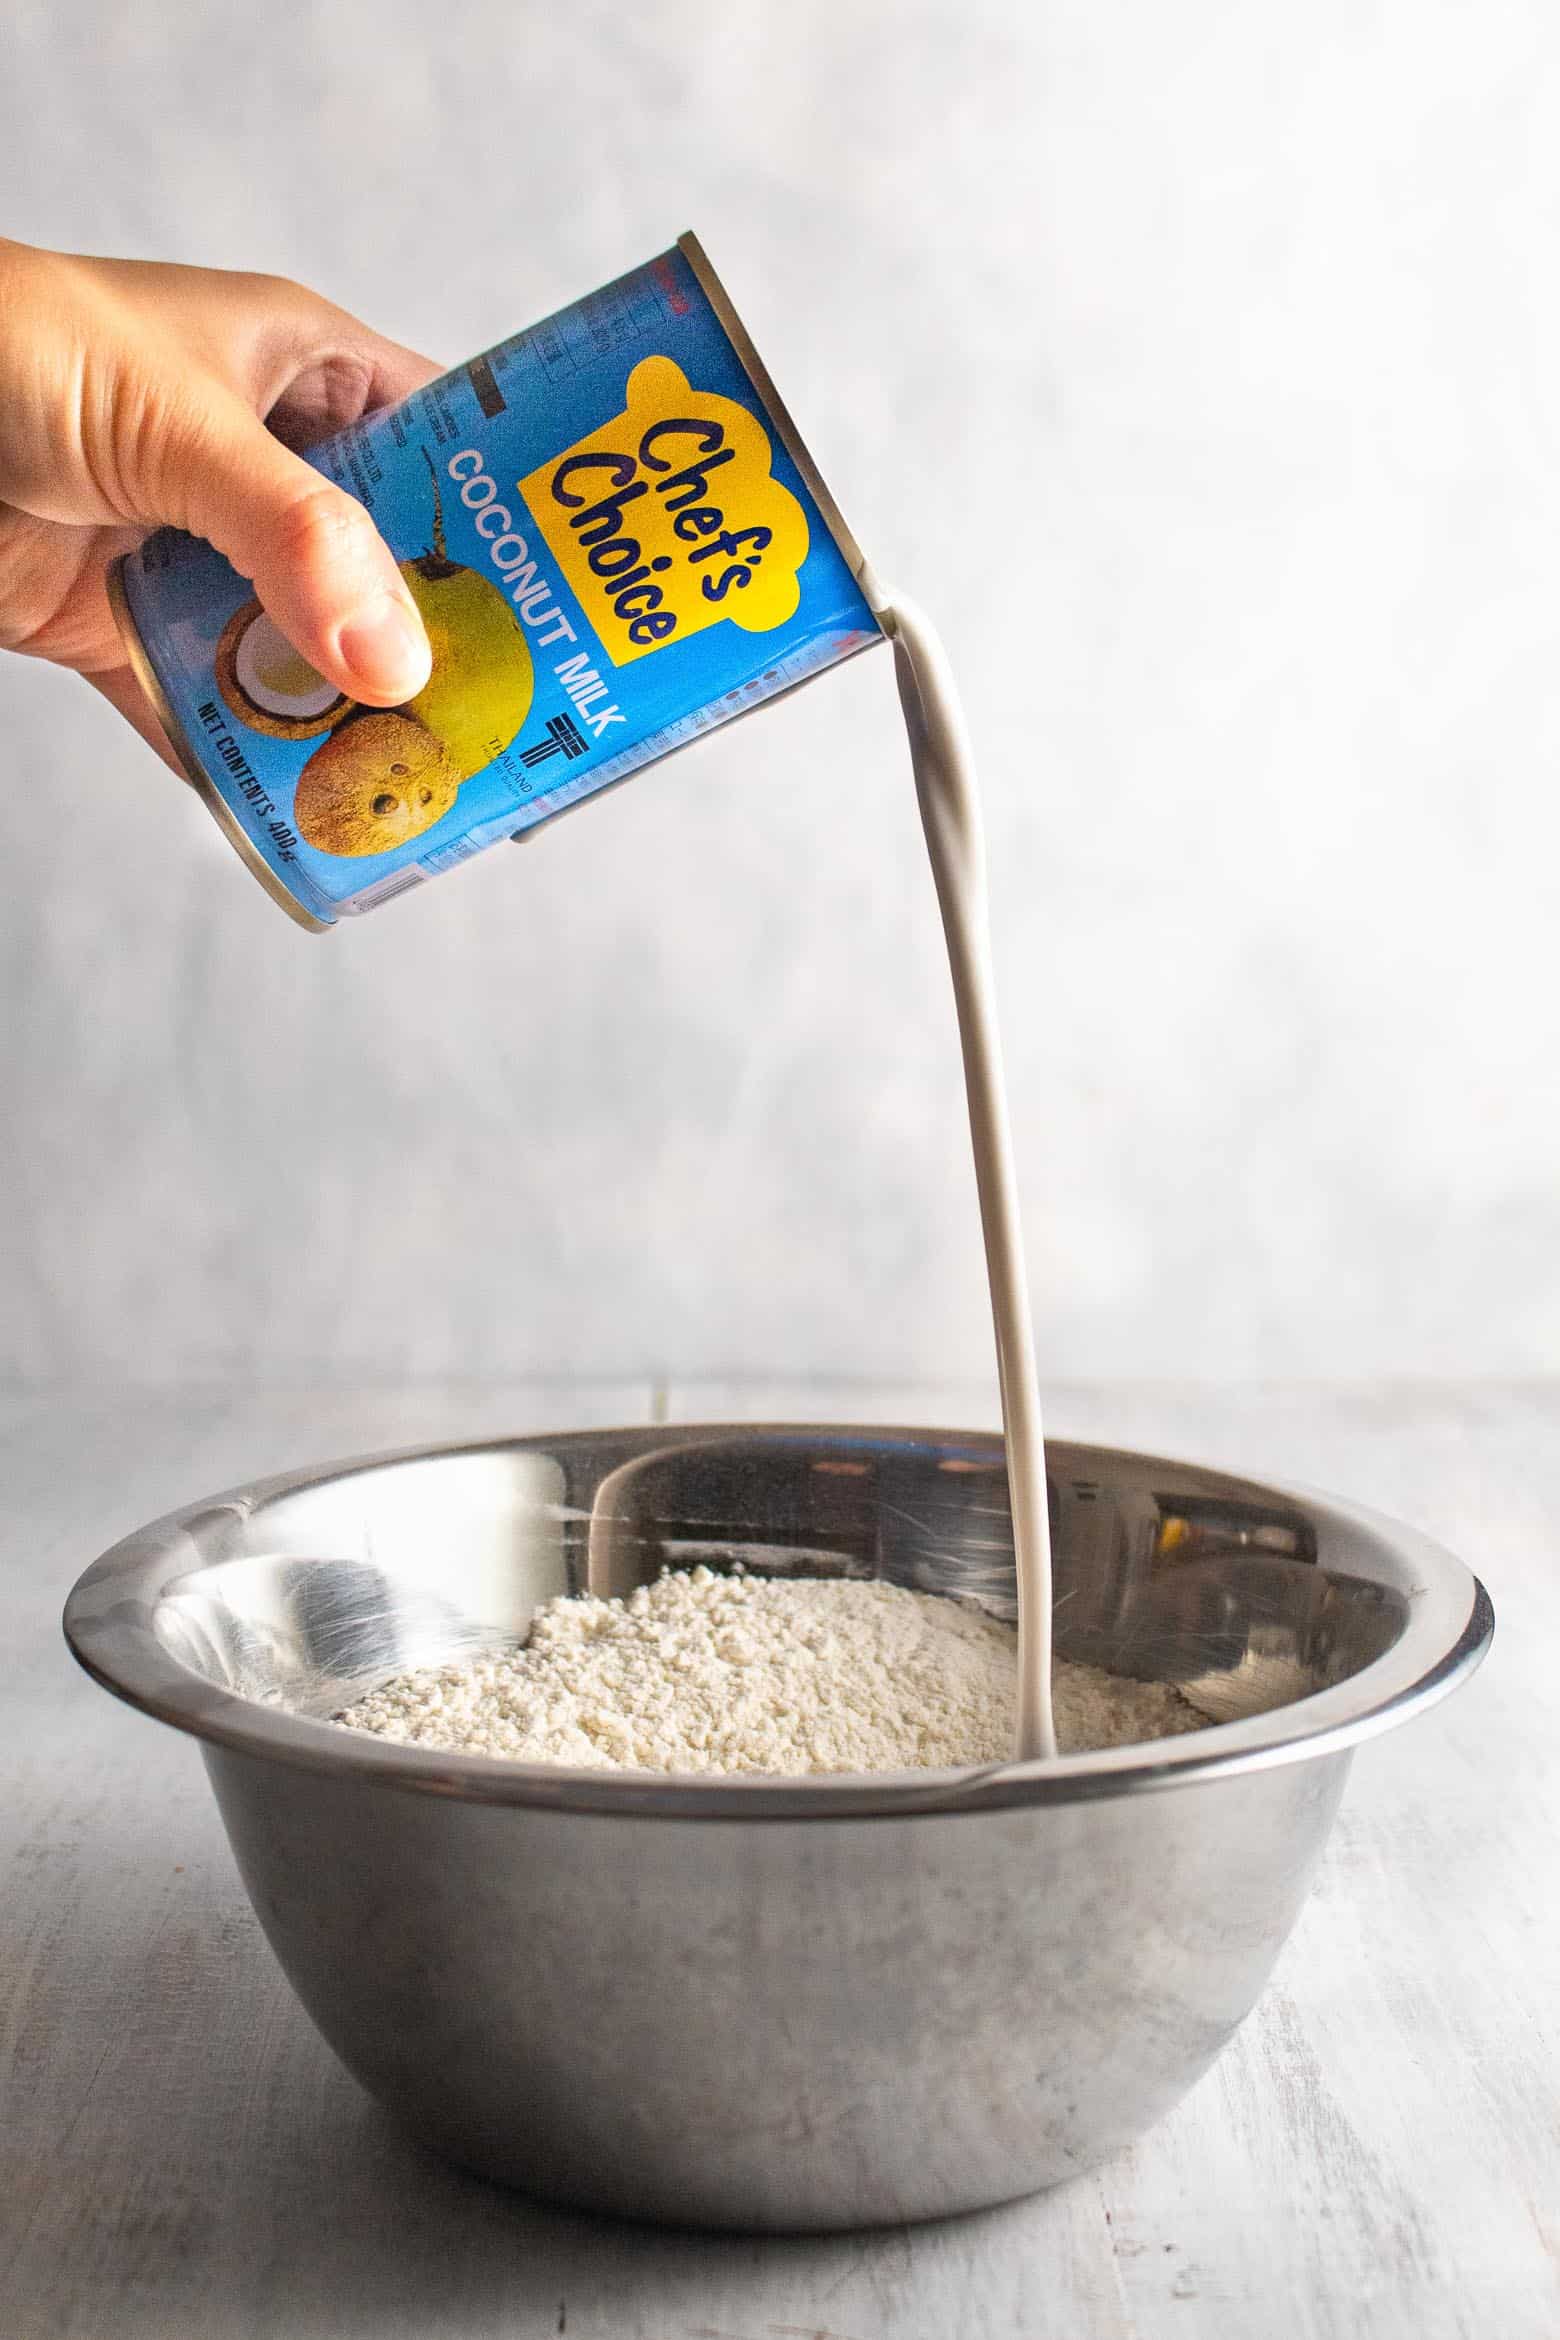 A can of coconut milk being poured into a bowl of flour.